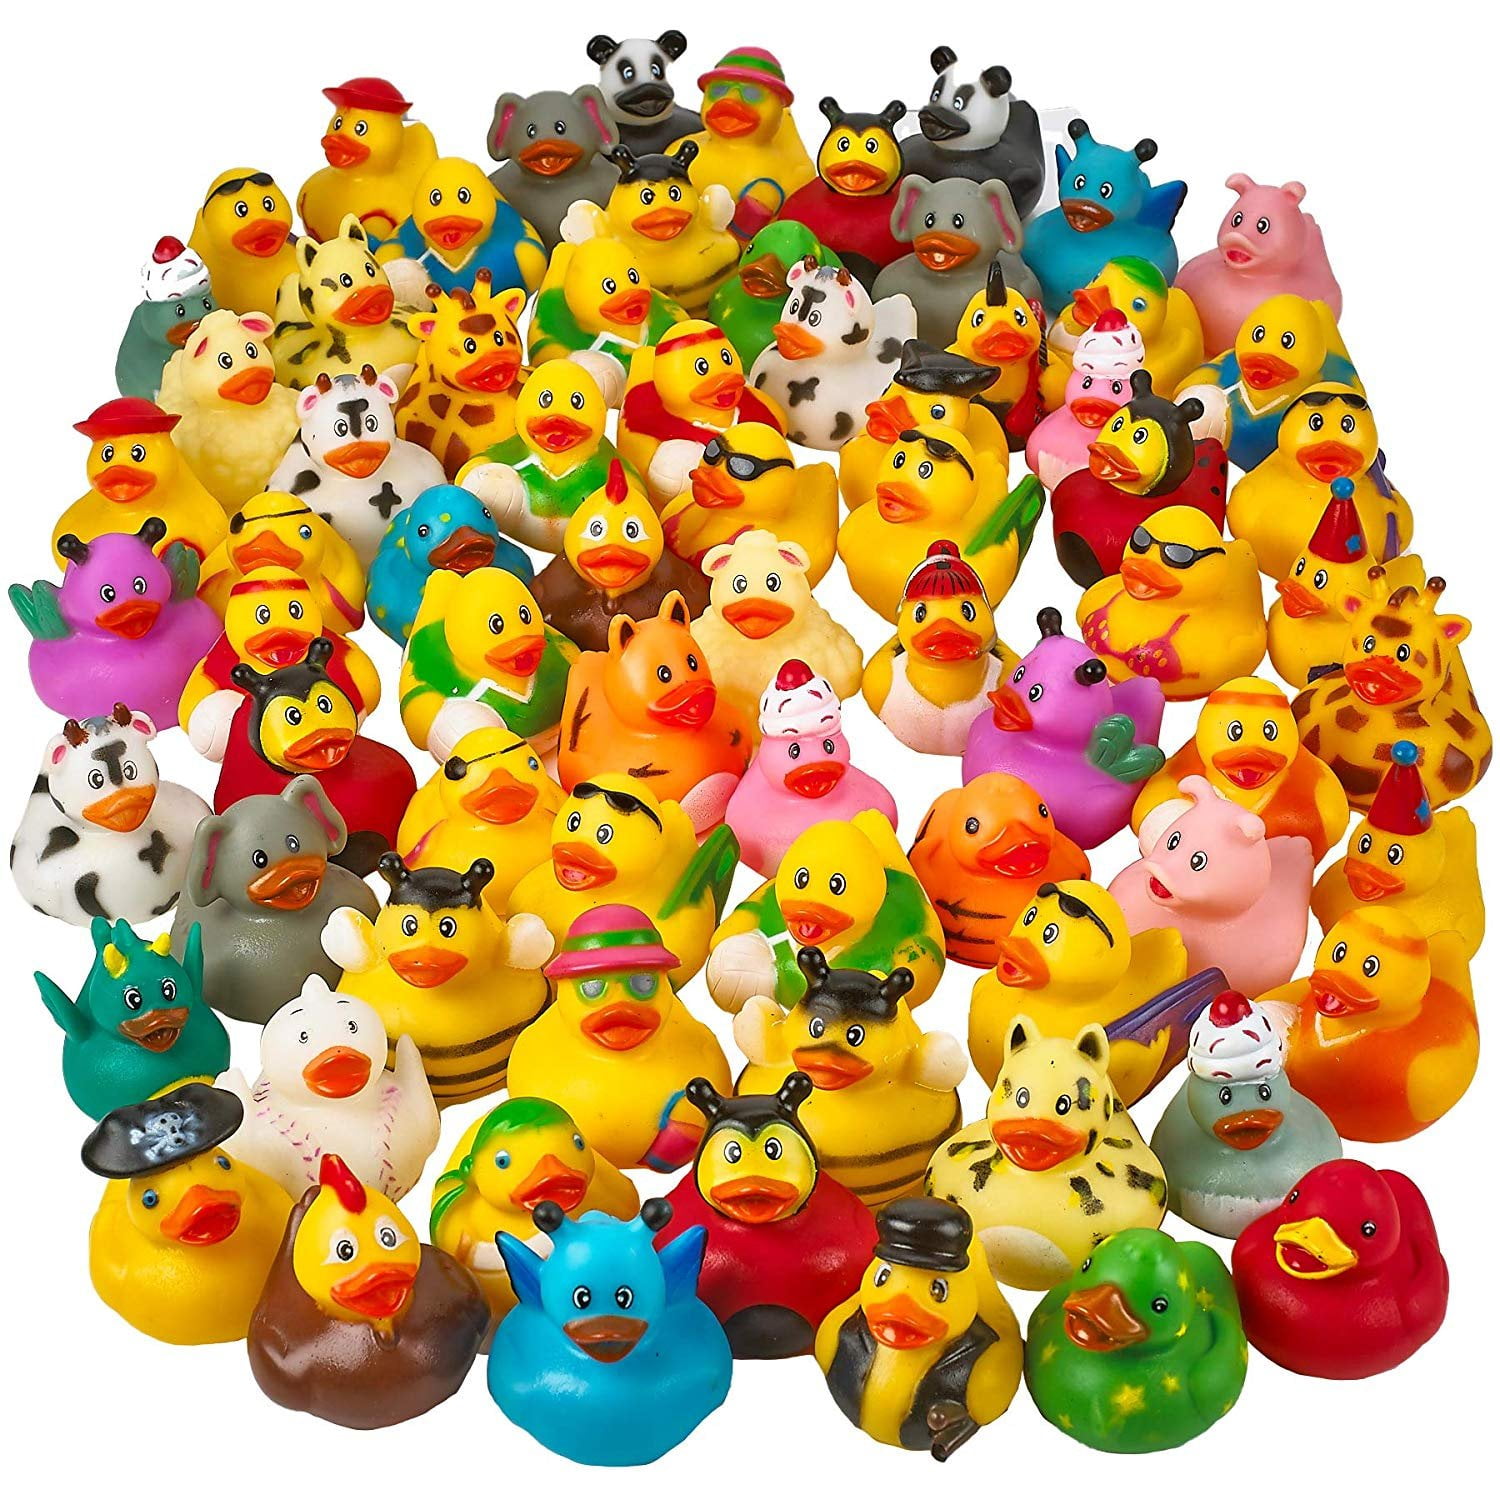 24 MINI RUBBER DUCKS bath toys kids pool toy duckies party favor floating duck 